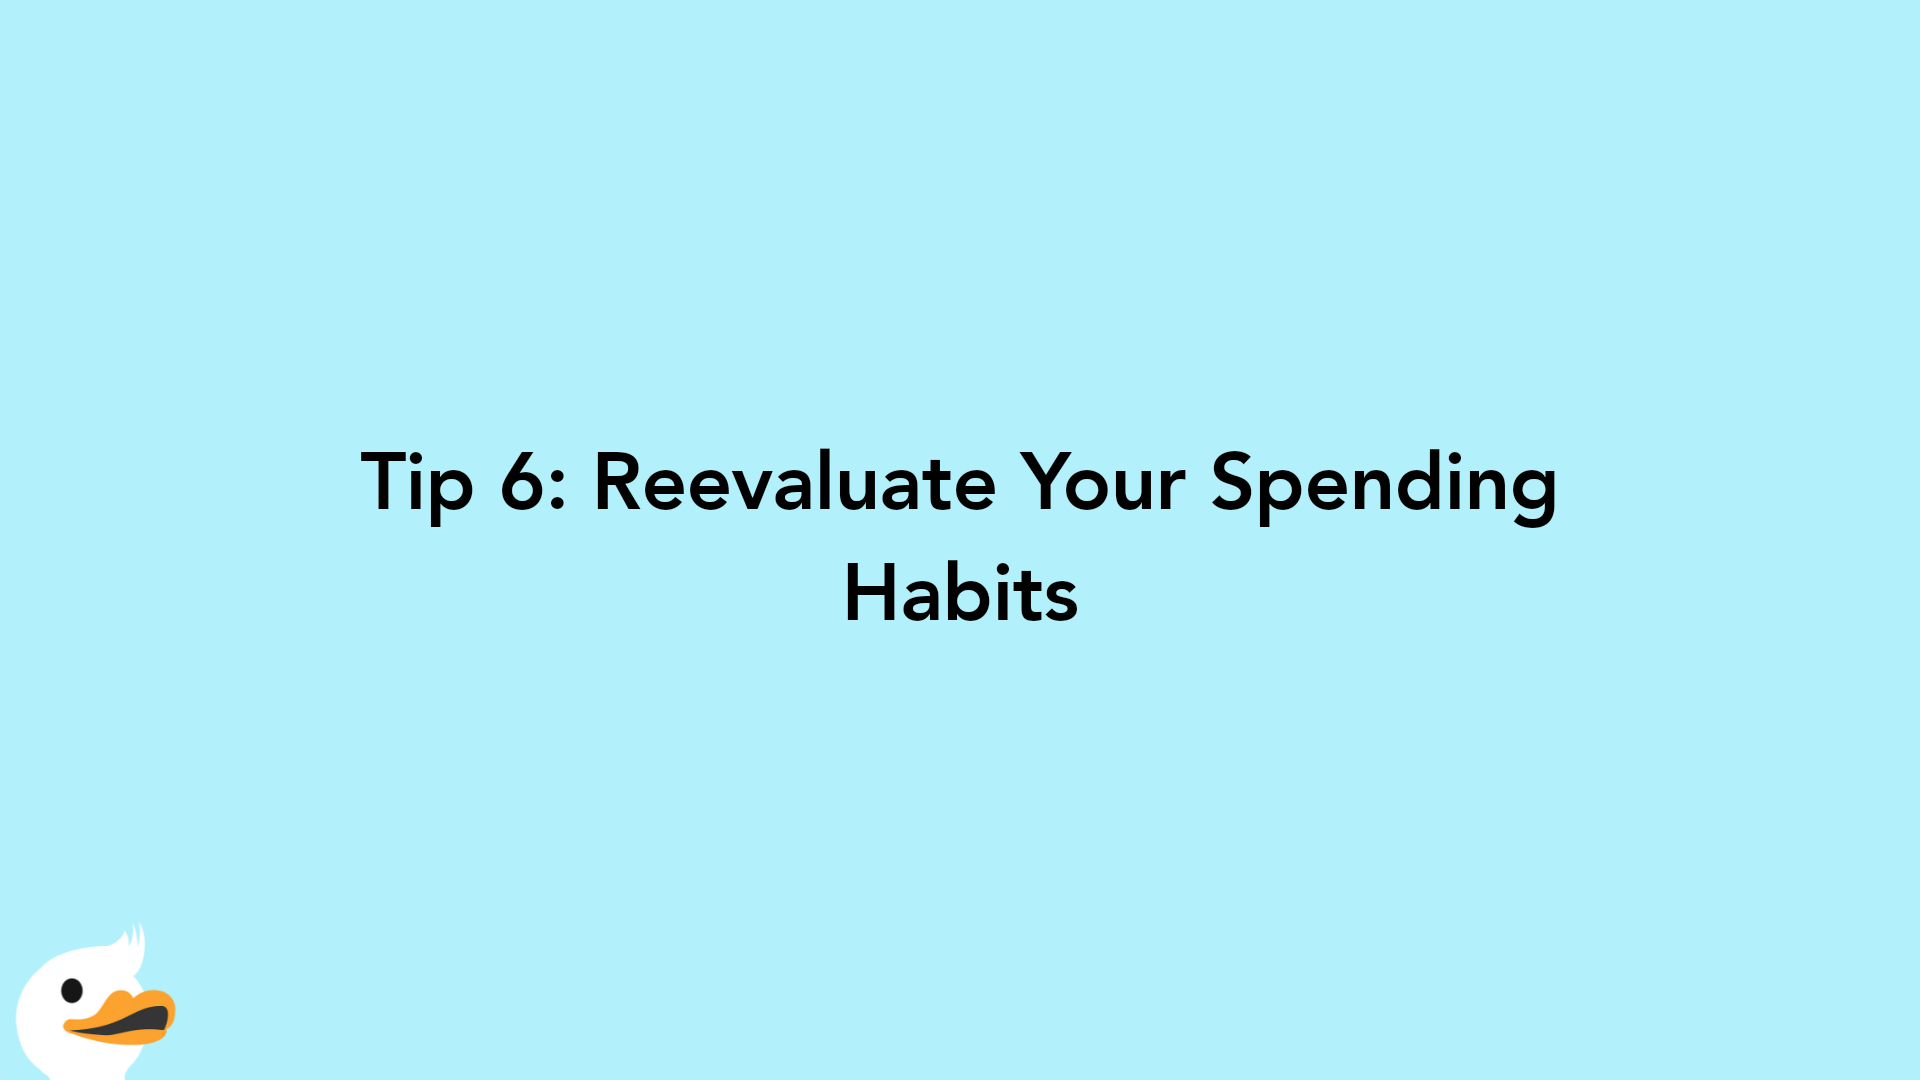 Tip 6: Reevaluate Your Spending Habits